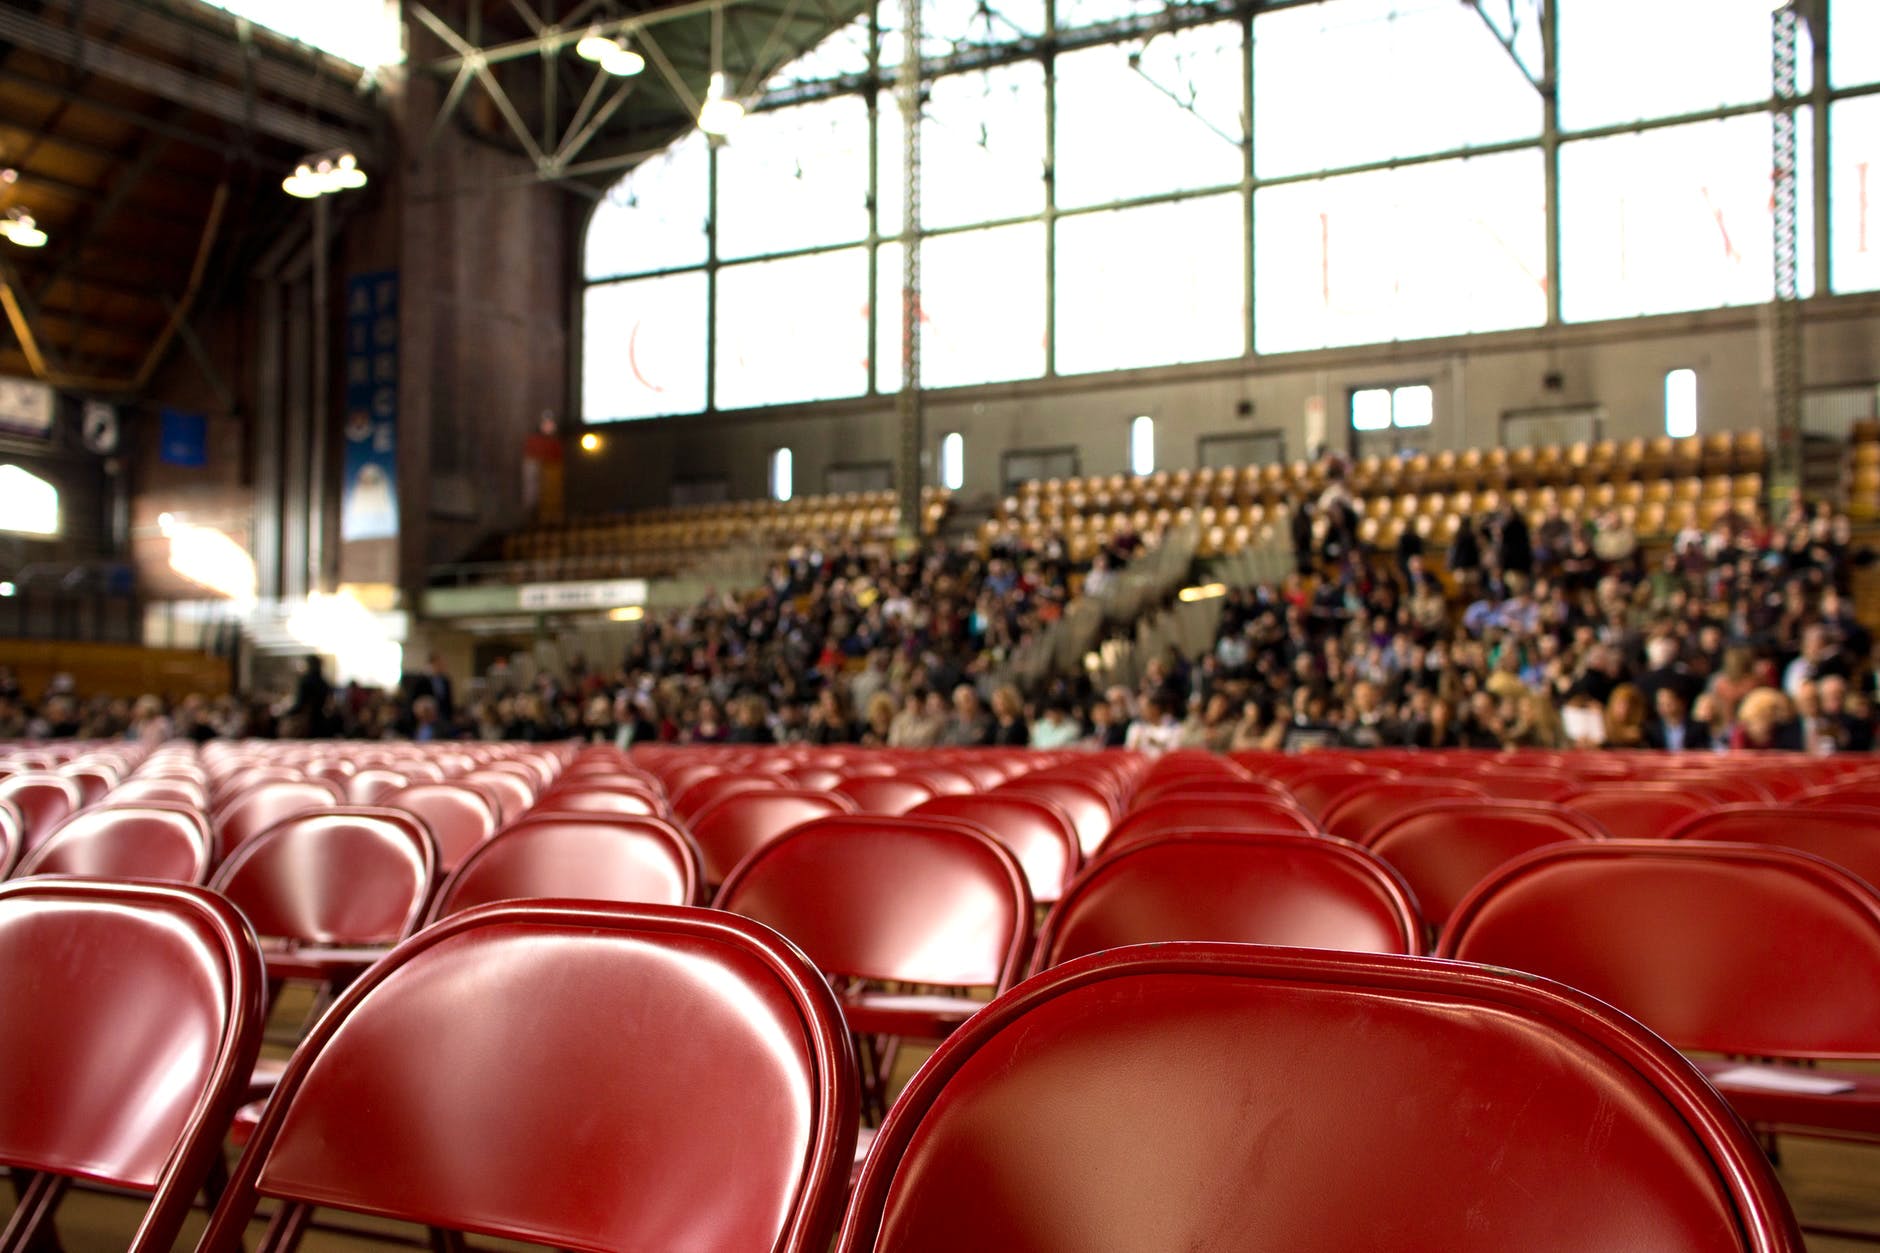 Auditorium,Red,Audience,Crowd,Conference hall,Chair,Event,Theatre,Architecture,Building